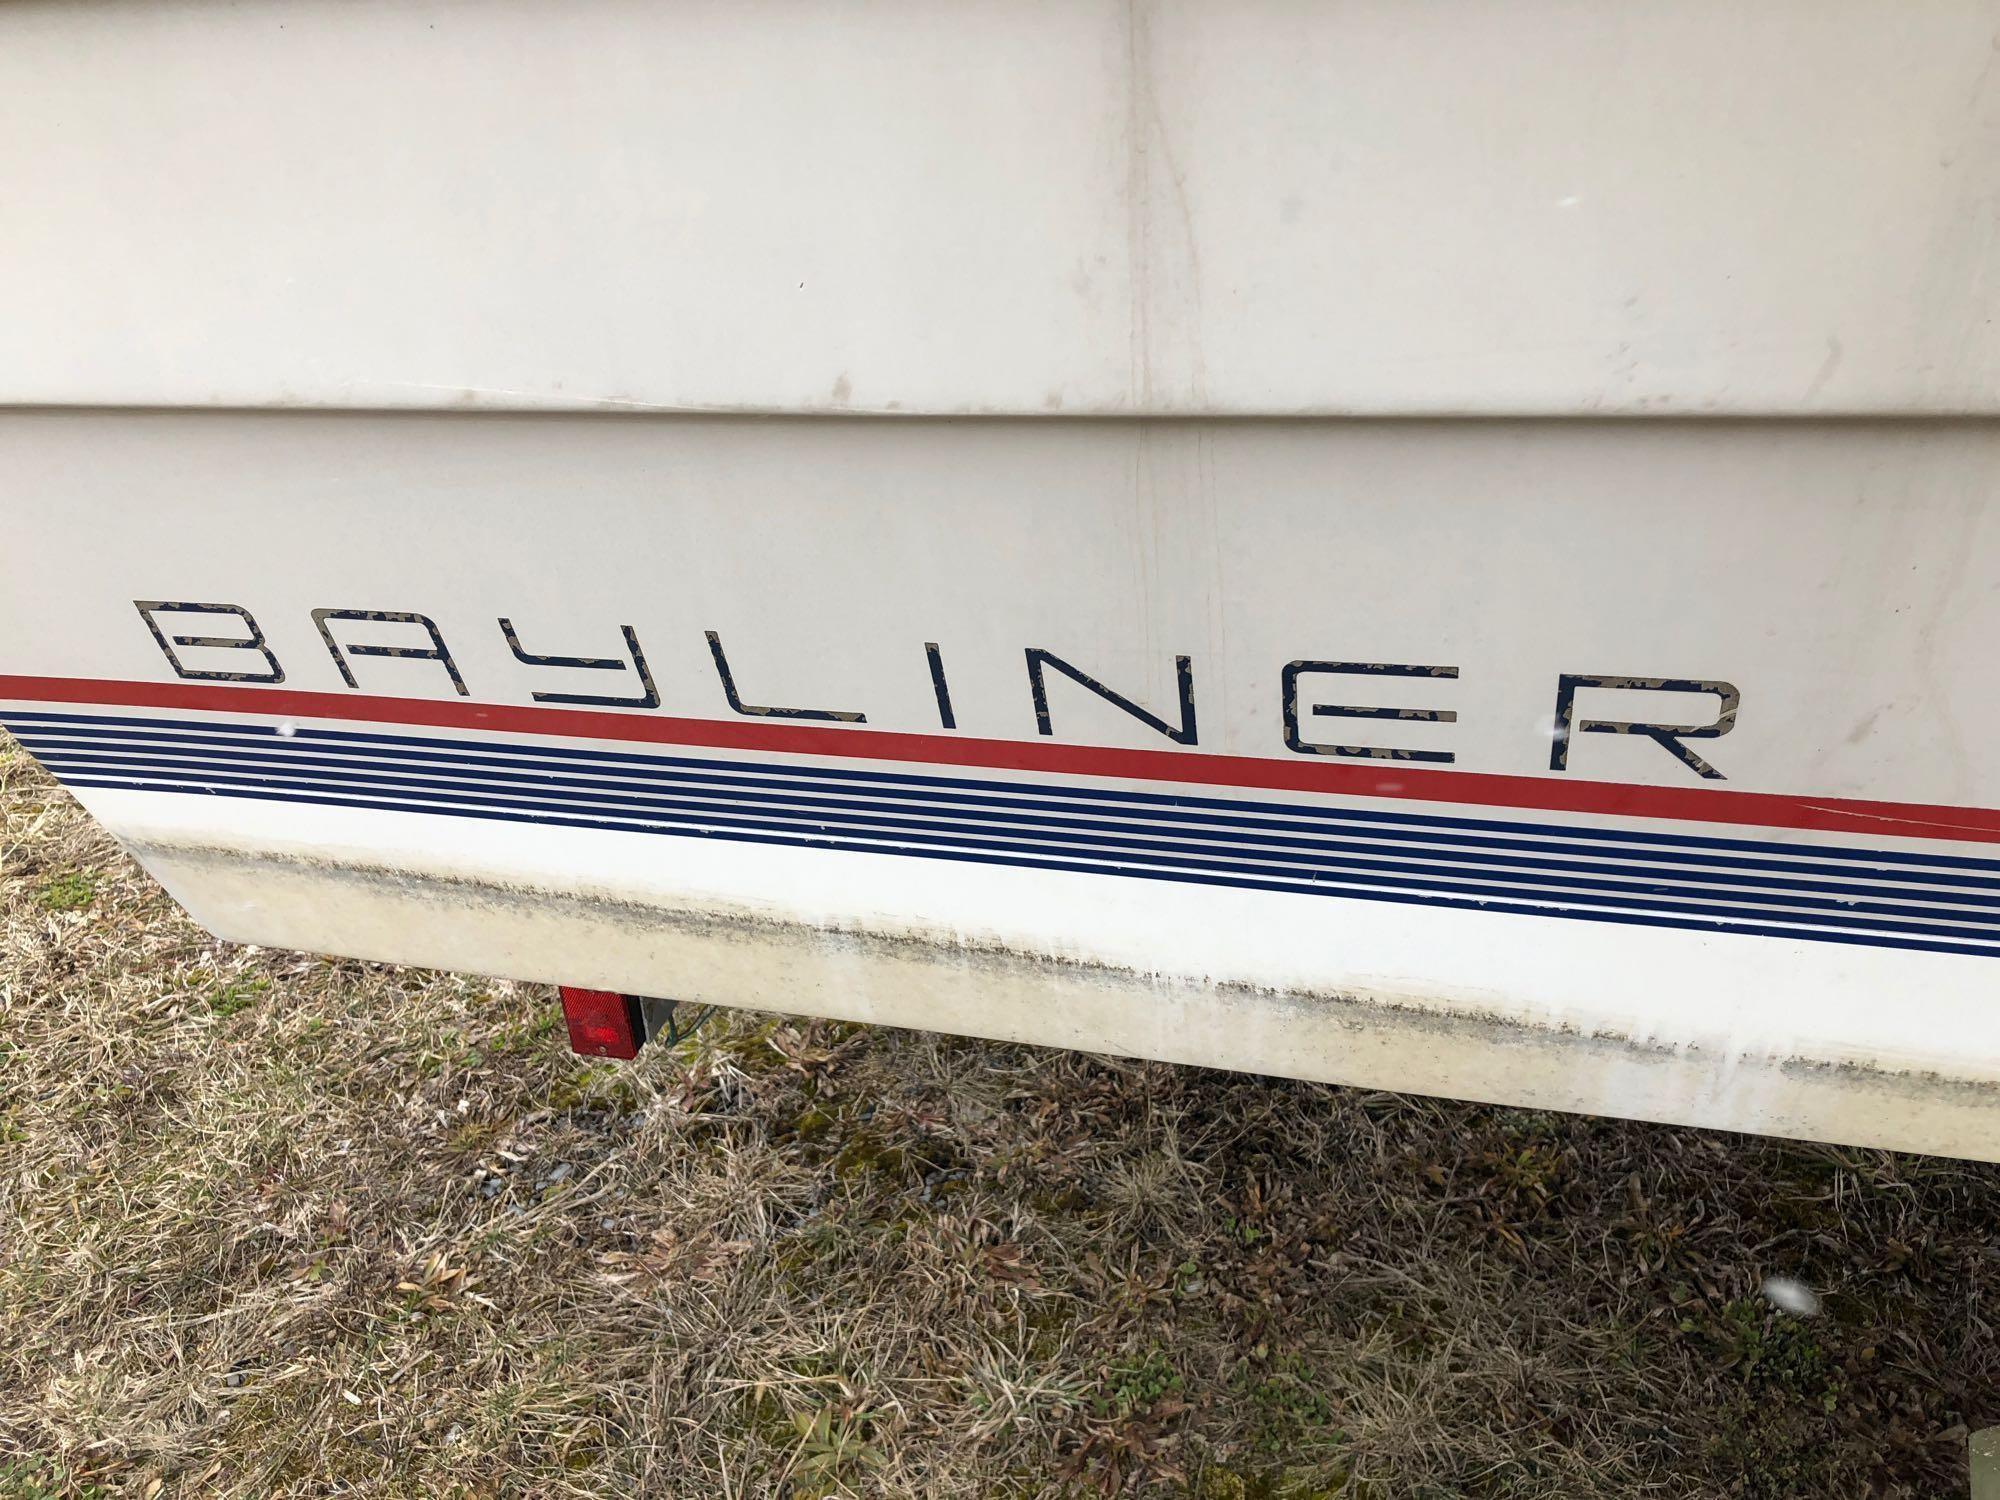 1985 BAYLINER MARINE CORP 19 foot boat/ Force 125 Motor and Trailer